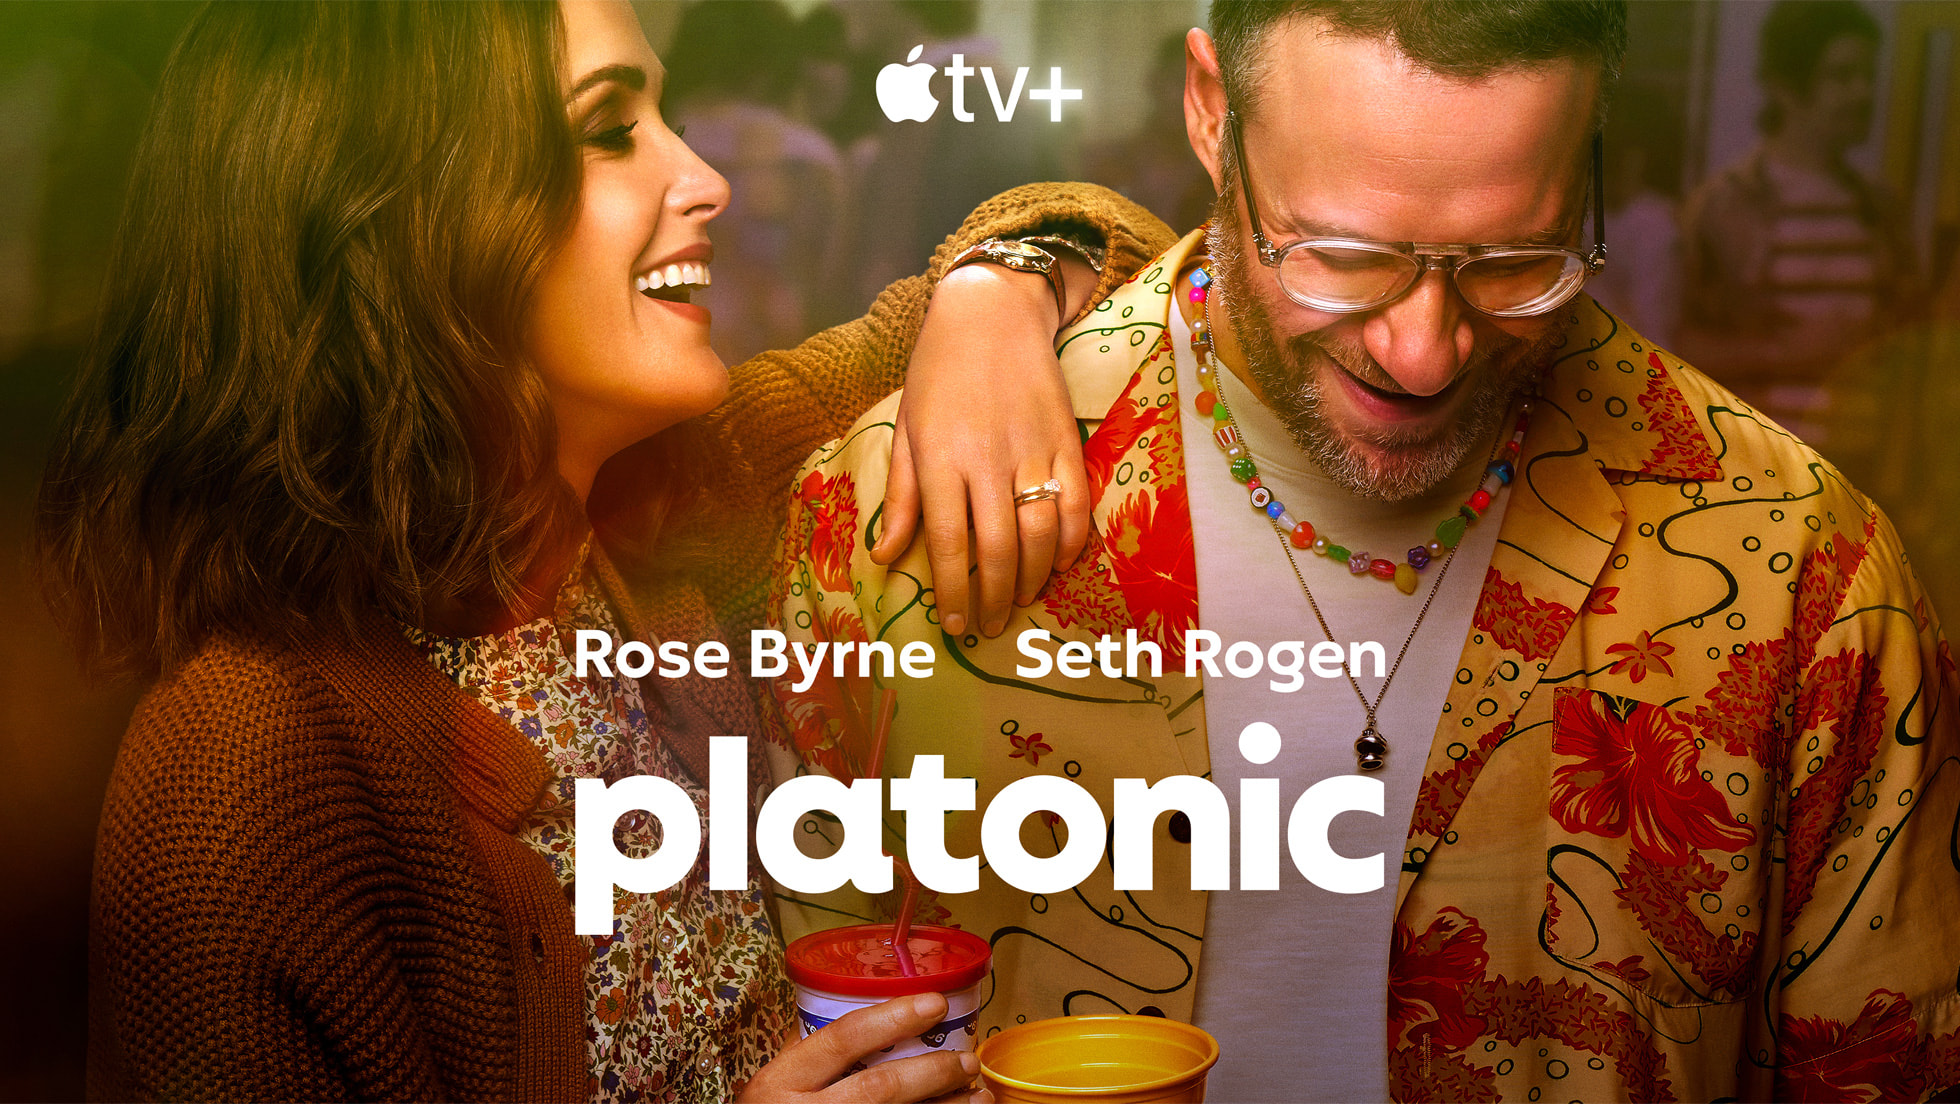 Apple Tv Announces Season Two Renewal For Hit Comedy “platonic” Starring And Executive